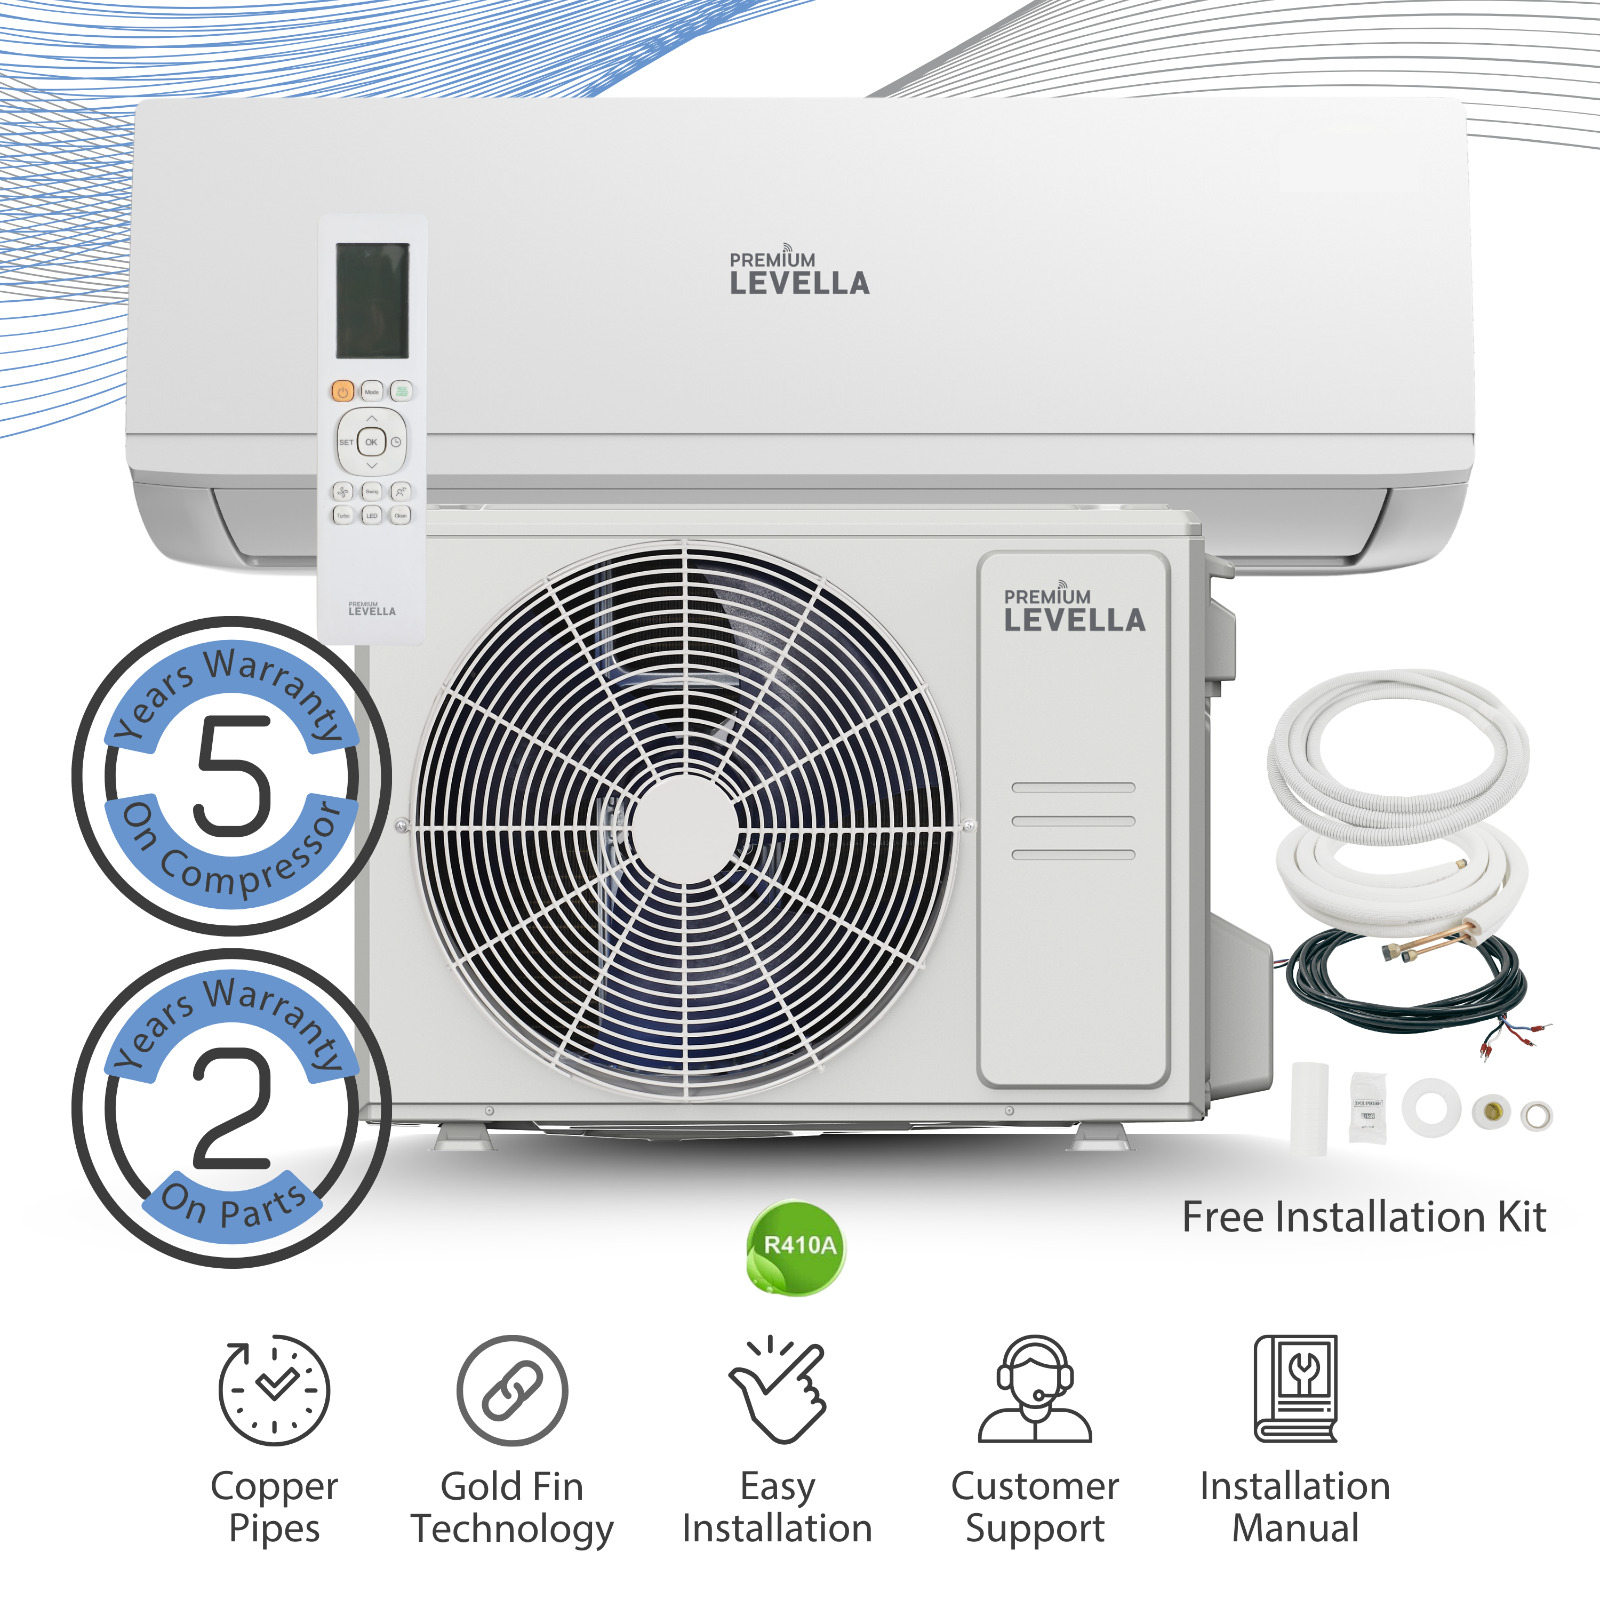 18000 BTU Air Conditioner Mini Split AC Ductless ONLY COLD 220V